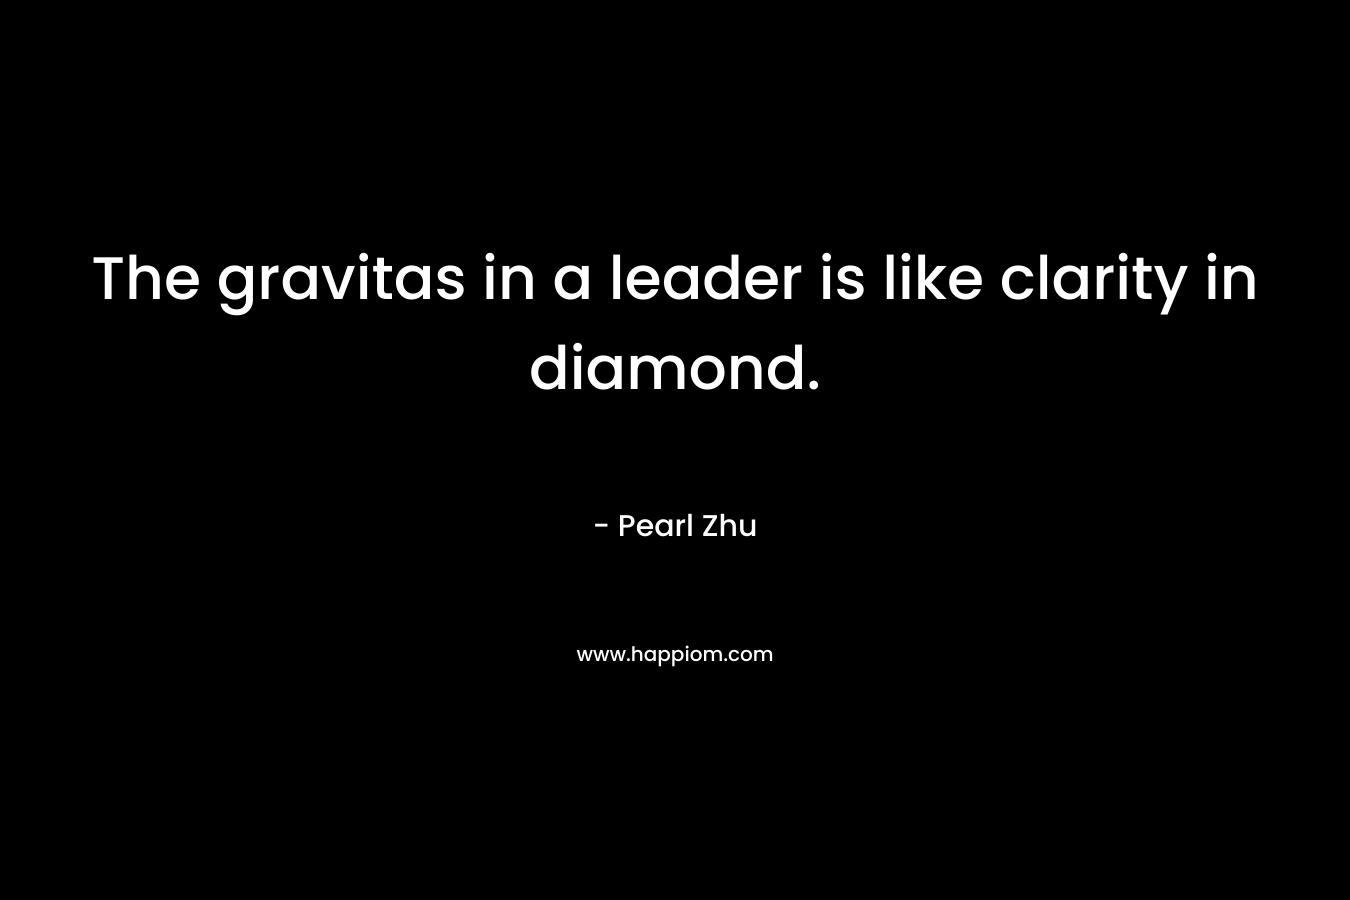 The gravitas in a leader is like clarity in diamond.